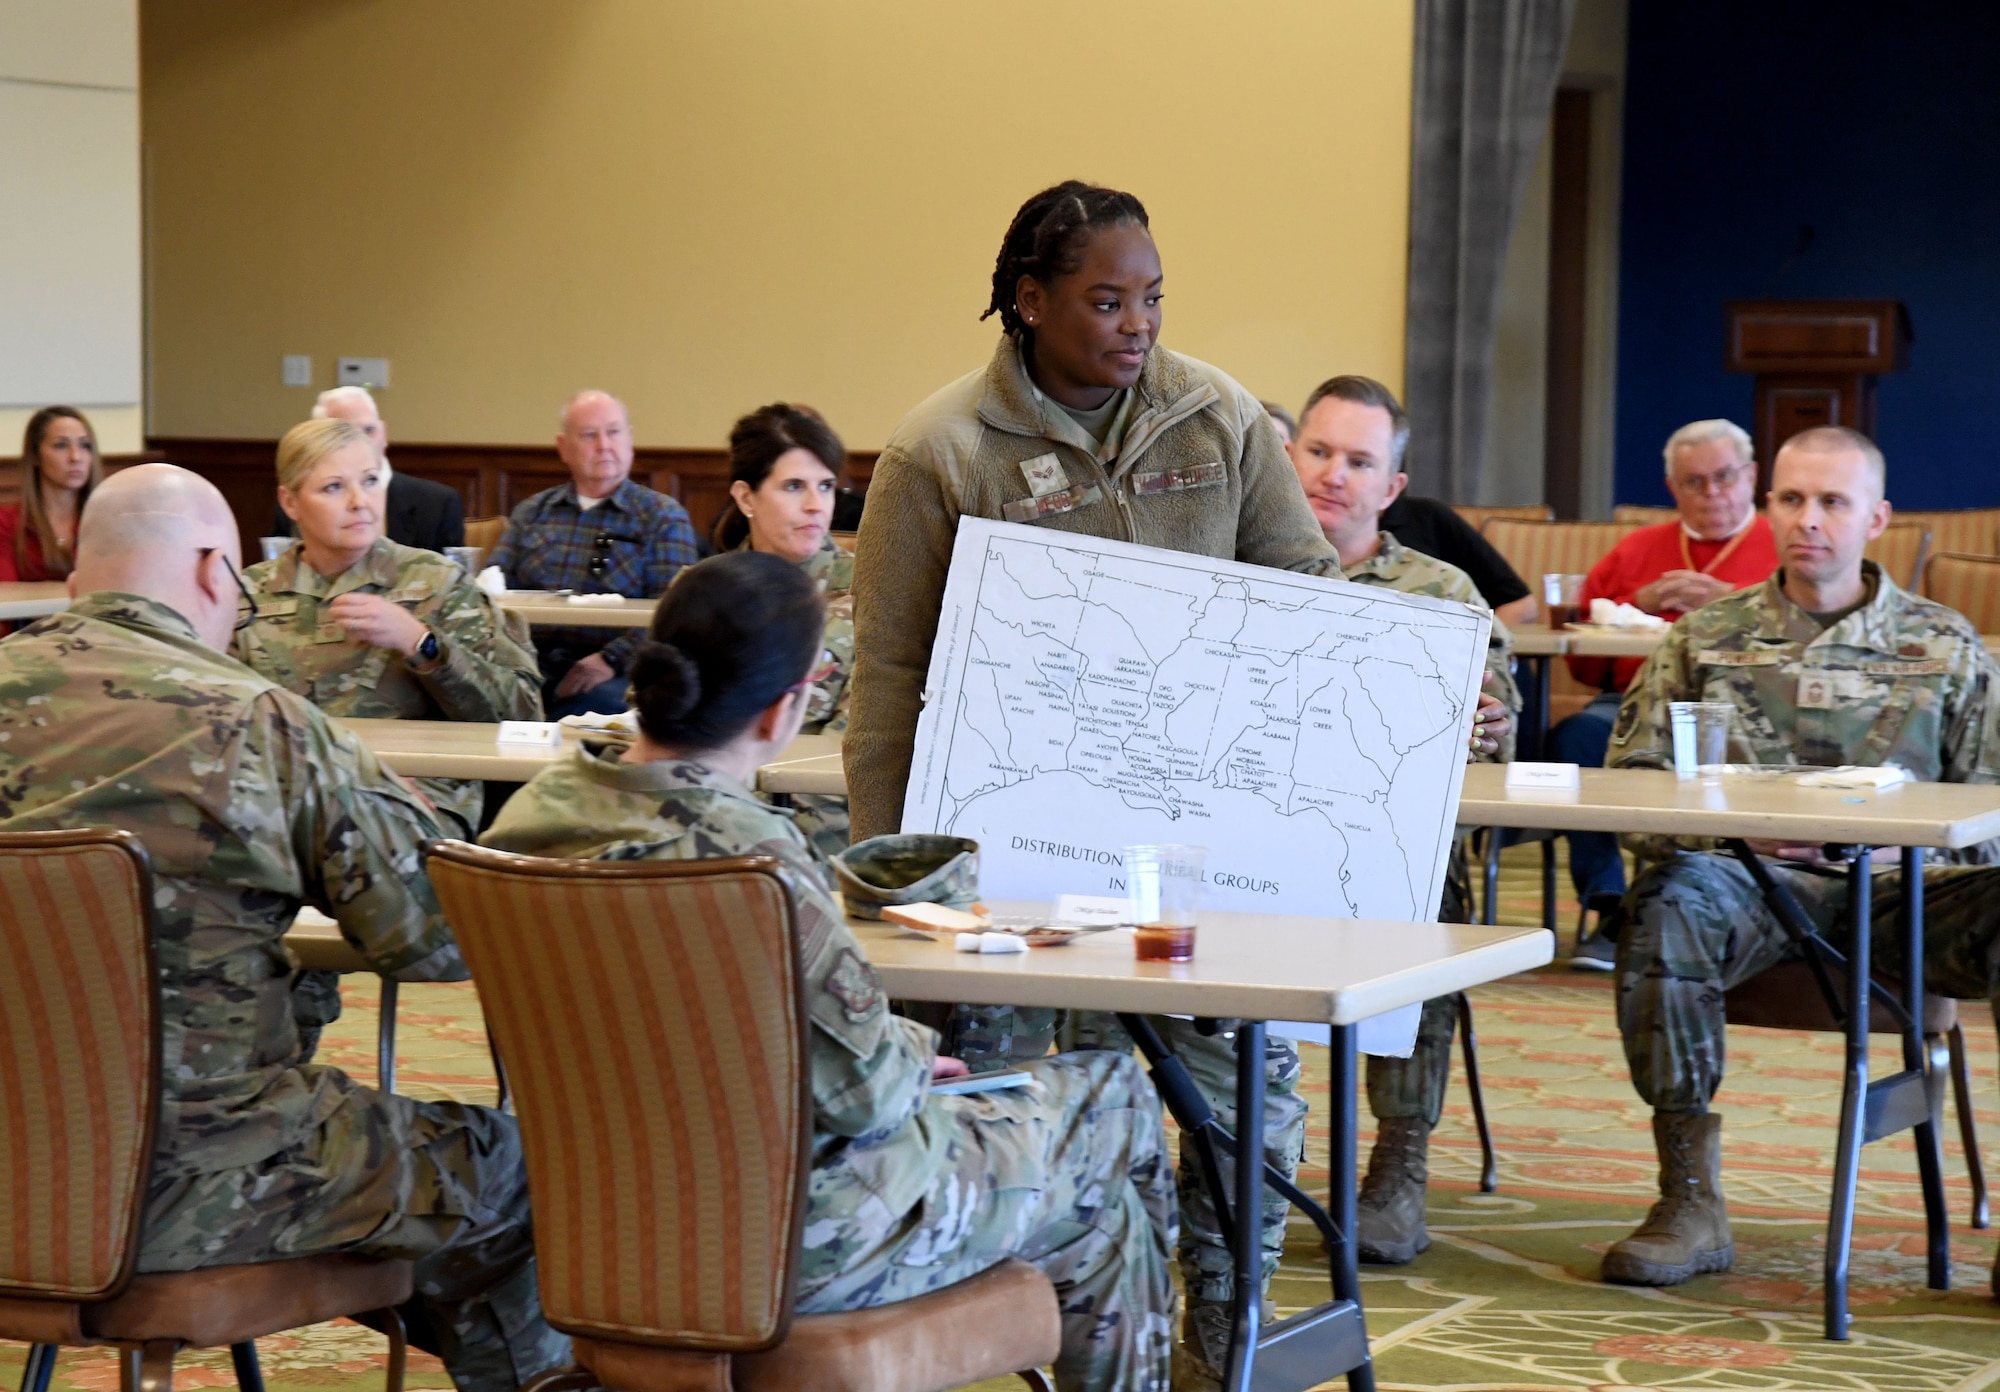 U.S. Air Force Senior Airman Paige Webb, 81st Medical Support Squadron medical logistics technician, shows a map of the distribution of tribal groups in the 1700s during a Native American History Month story telling event inside the Bay Breeze Event Center at Keesler Air Force Base, Mississippi, Nov. 21, 2022.